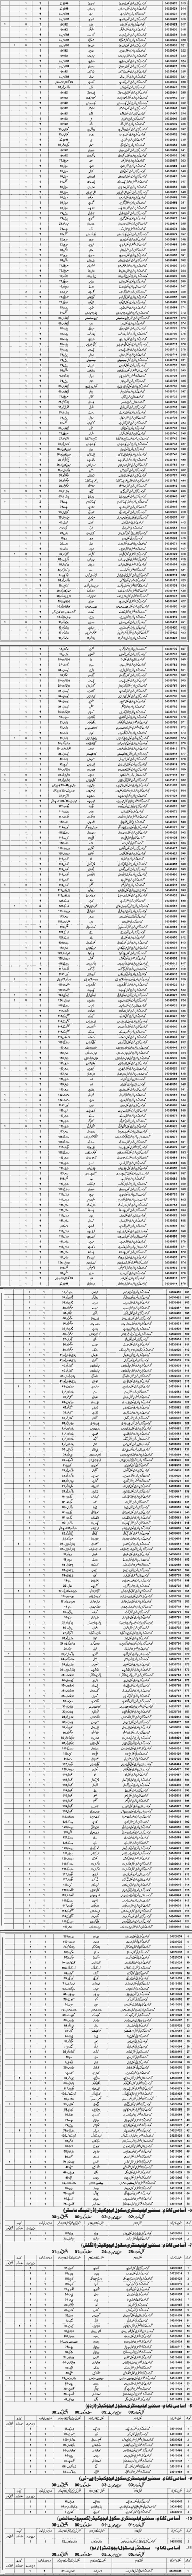 2016-11-21-educators-jobs-in-sialkot-from-education-department-punjab-via-nts-2408-opportunities-3